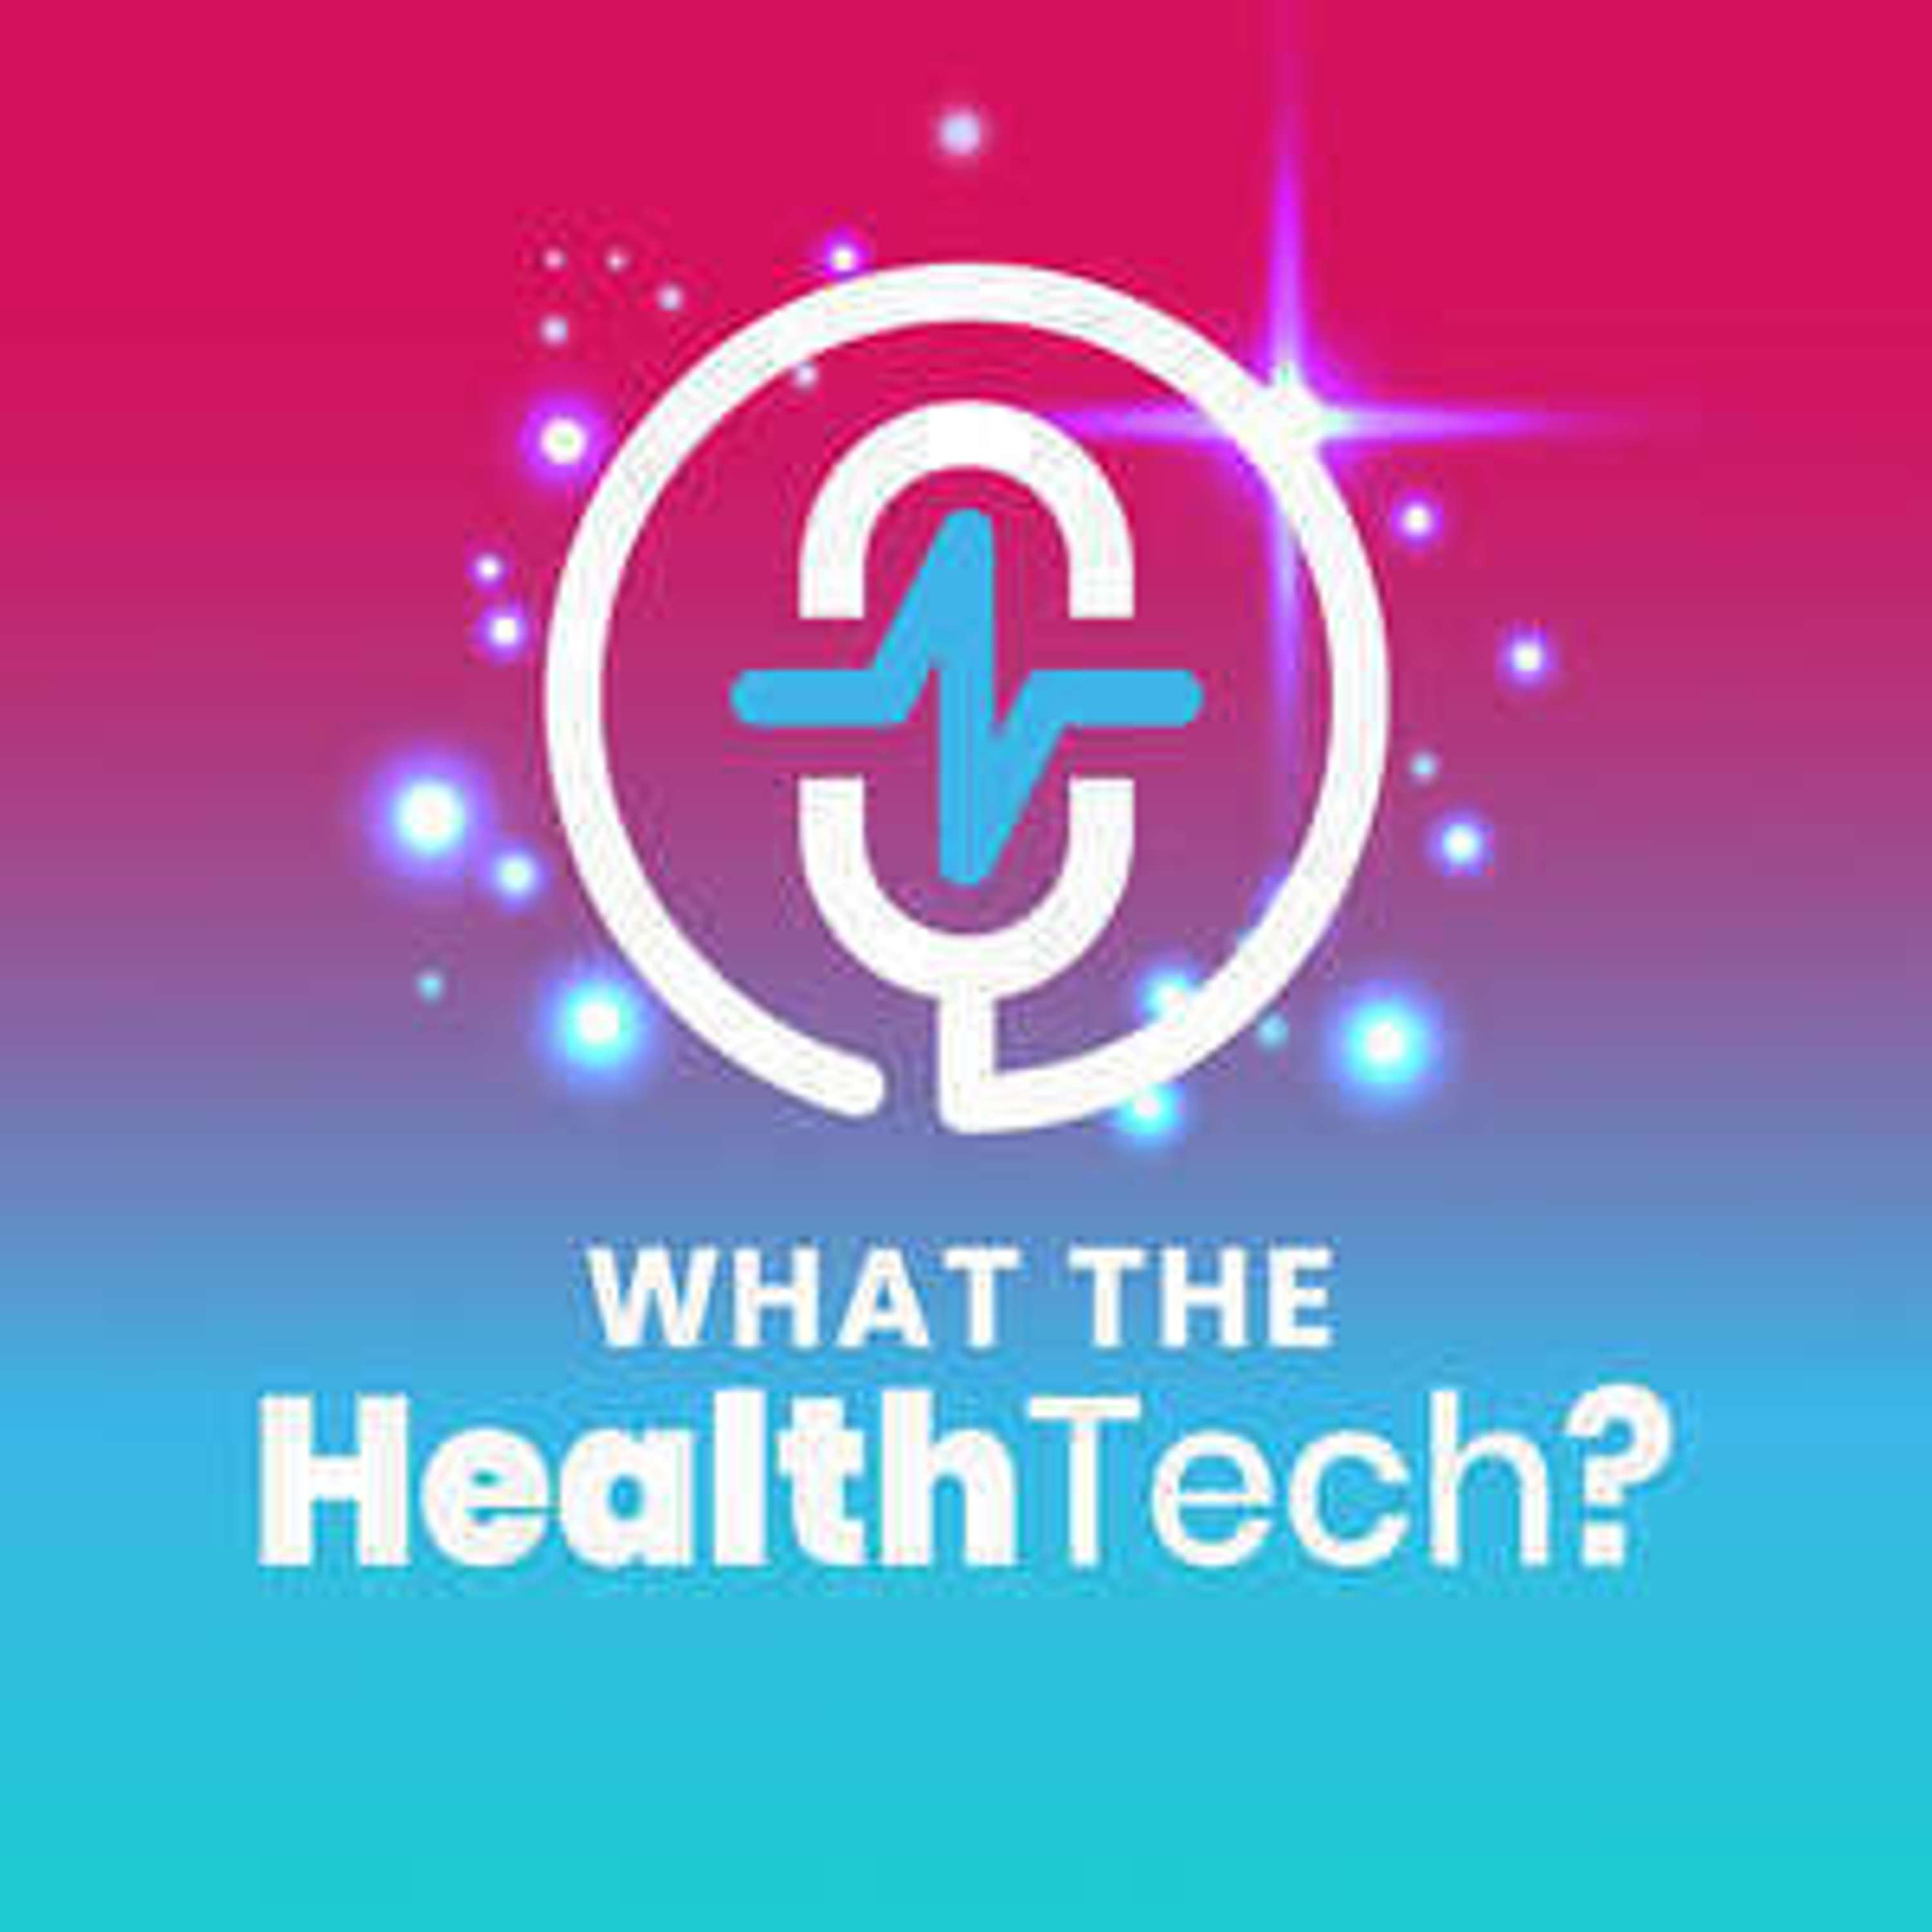 Ep051: What's your 'What the HealthTech' moment?